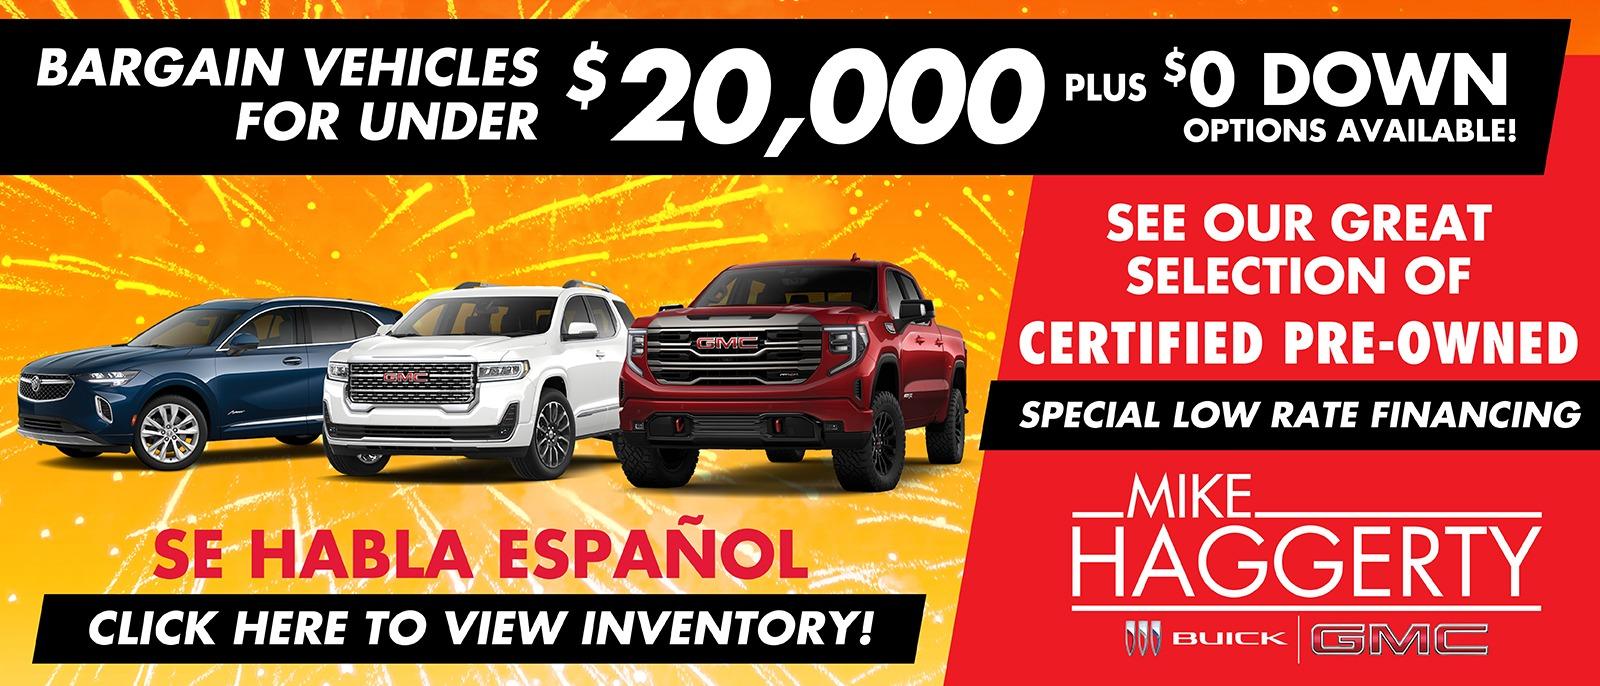 Bargain Vehicles for Under $20,000 | Mike Haggerty Buick GMC